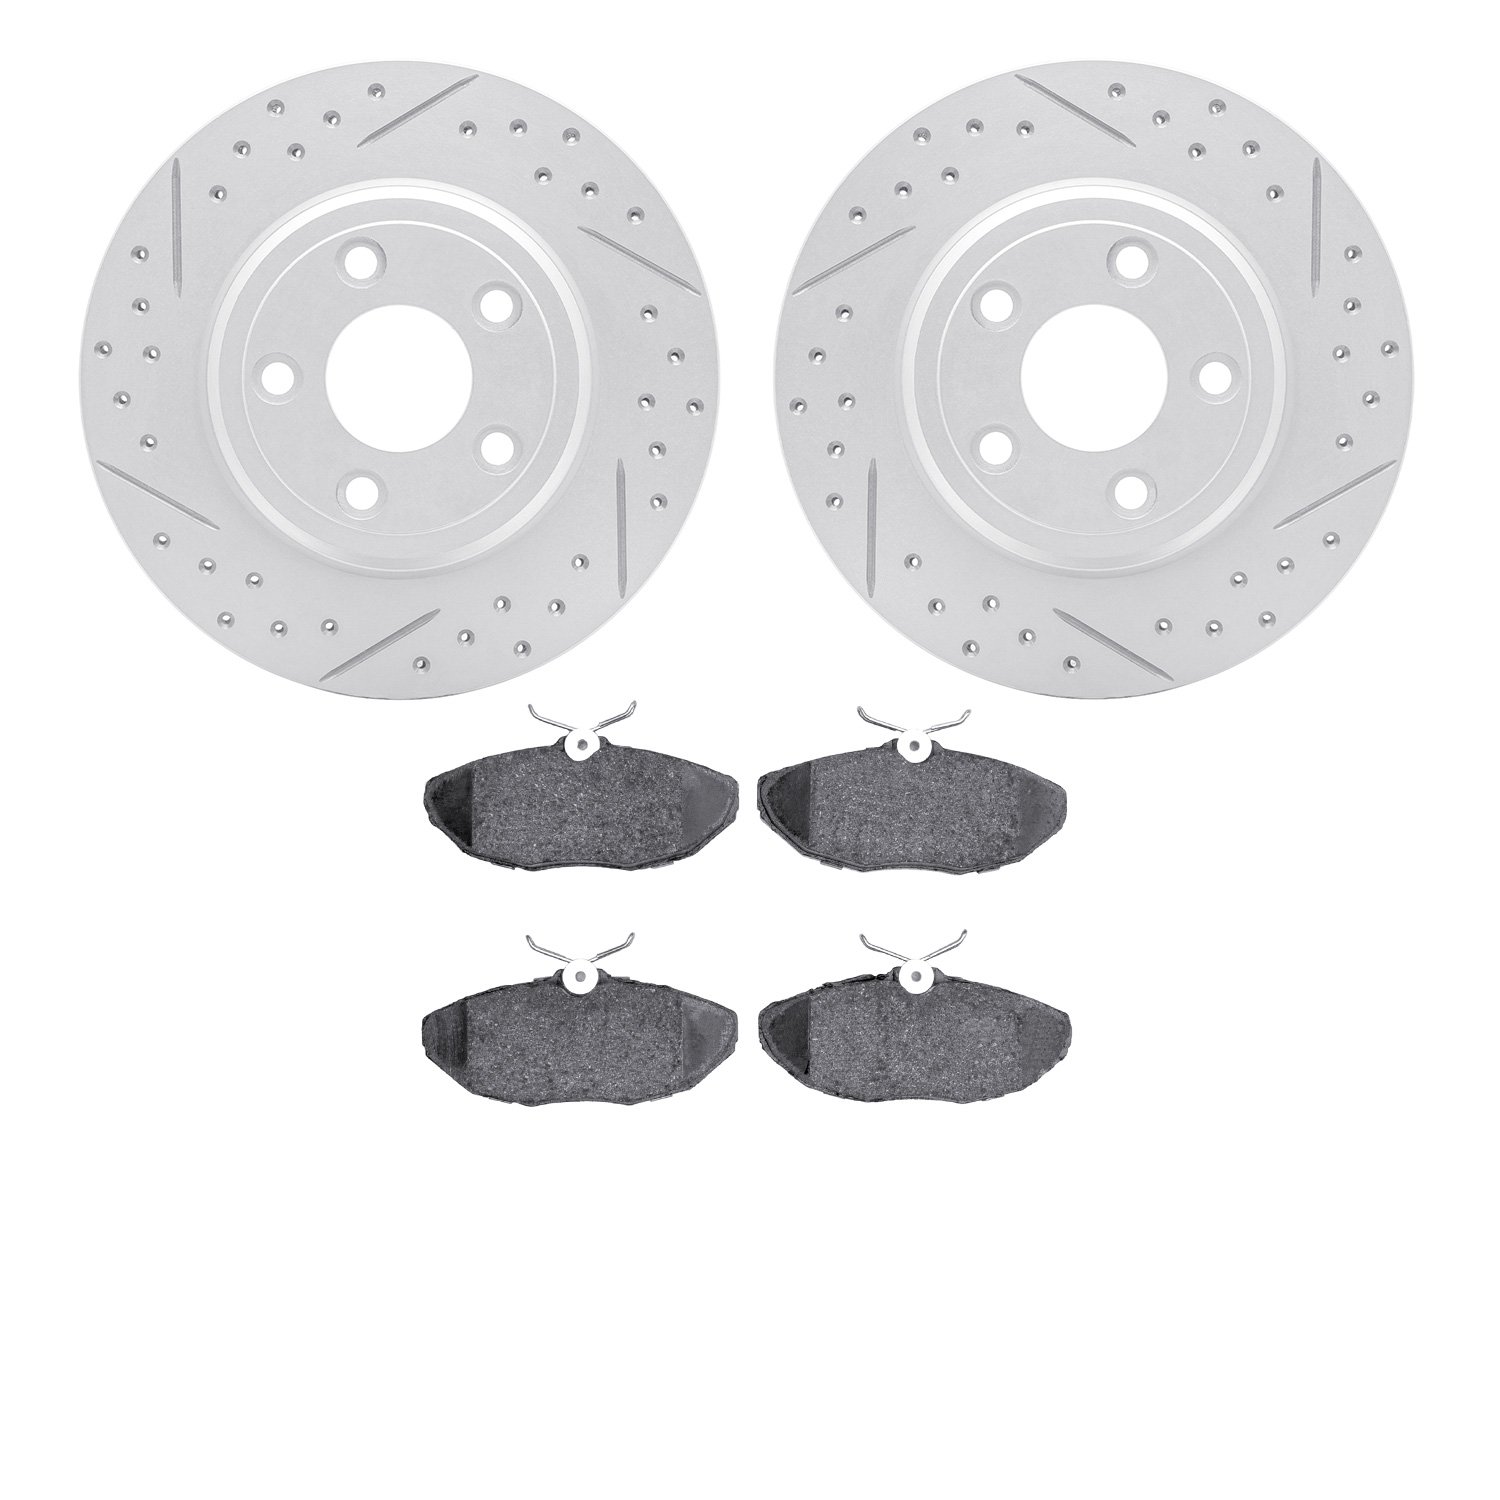 2502-54031 Geoperformance Drilled/Slotted Rotors w/5000 Advanced Brake Pads Kit, 2000-2006 Ford/Lincoln/Mercury/Mazda, Position: